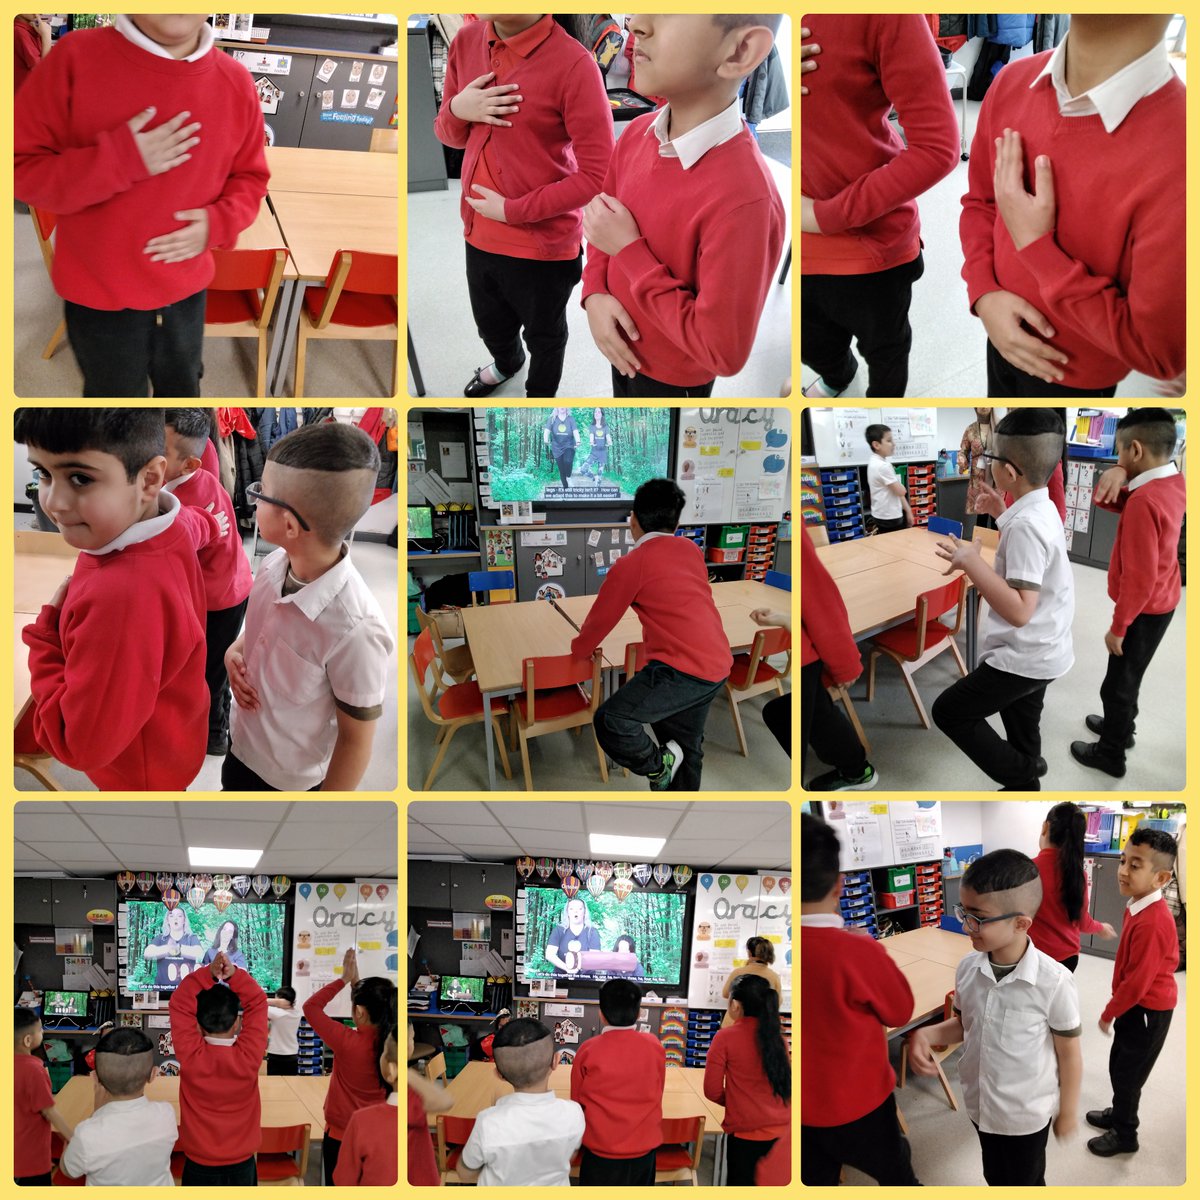 #shootingstars We have enjoyed our stormbreak this afternoon. Nature's Trees helped us balance and become aware of our feelings. #resilience #wellbeing #movement @hellostormbreak